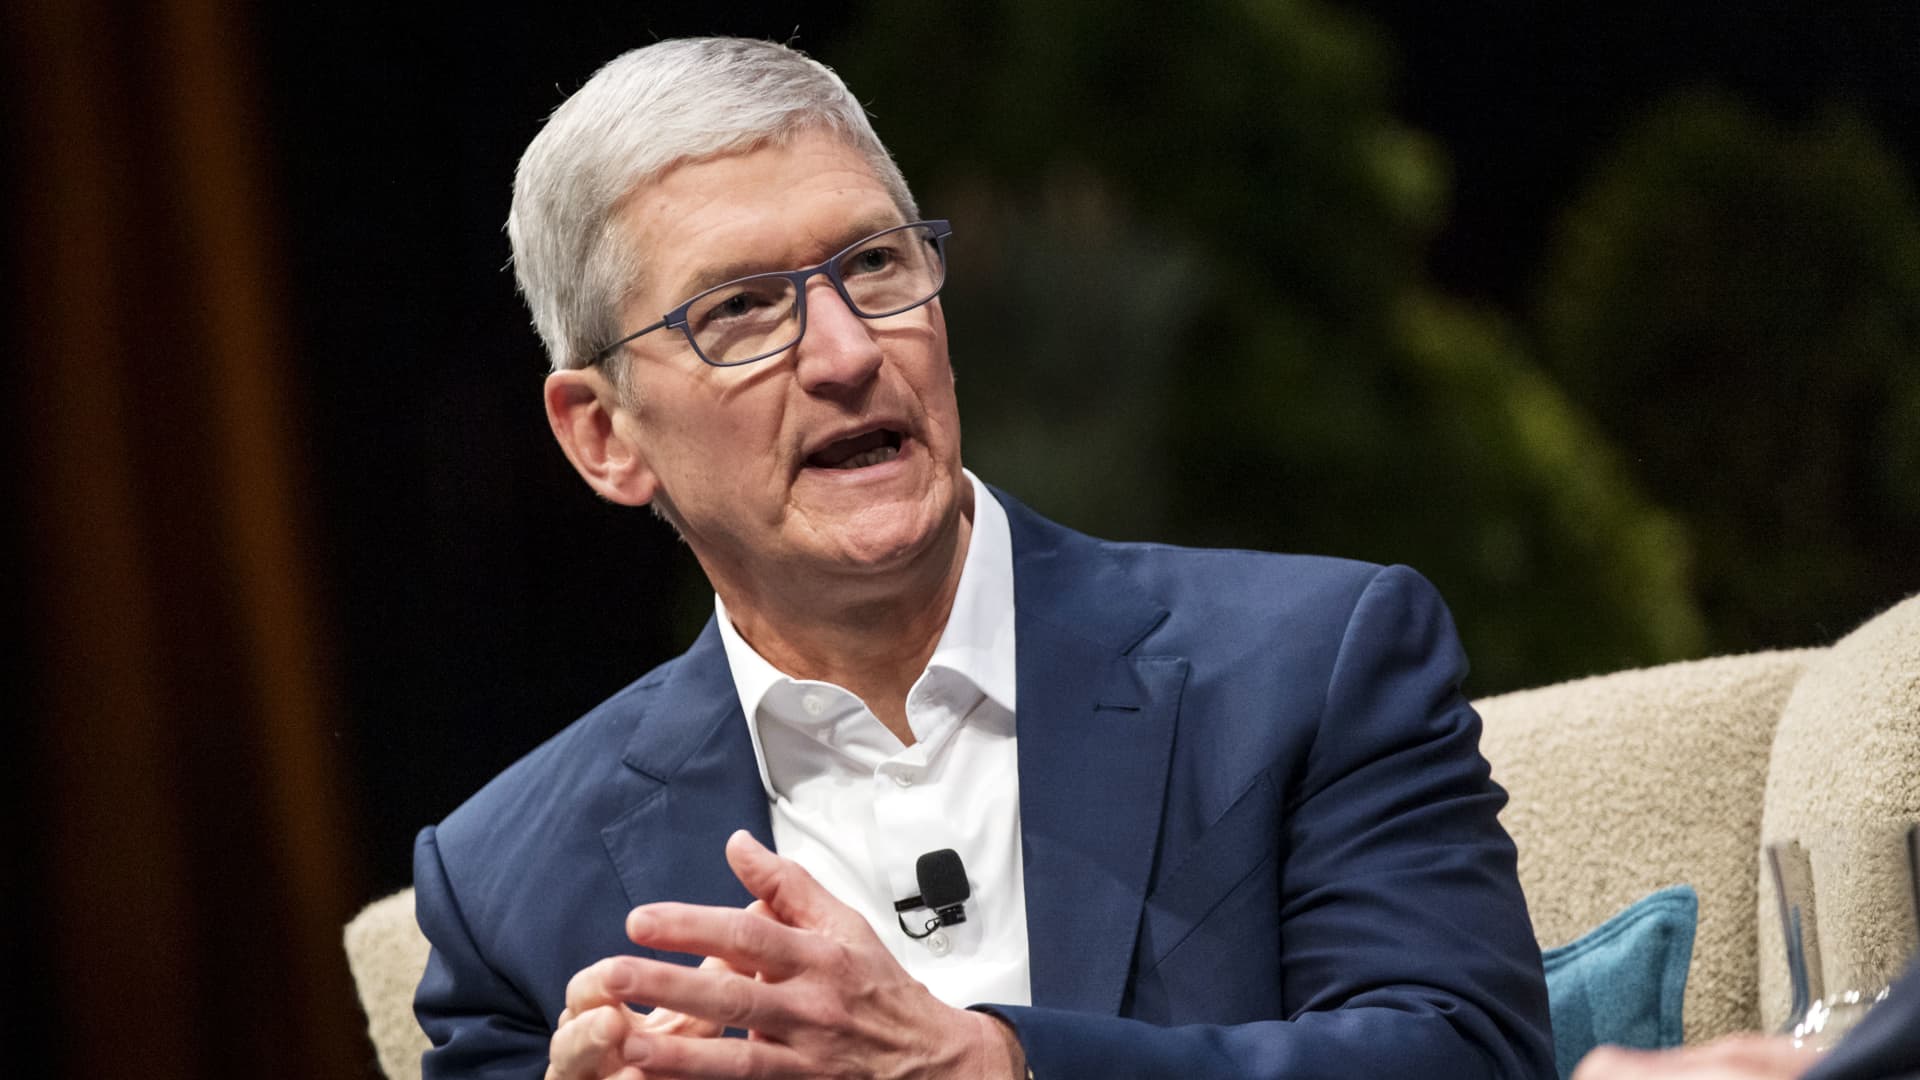 Apple CEO Tim Cook criticizes antitrust regulation, says some policies would hurt iPhone users